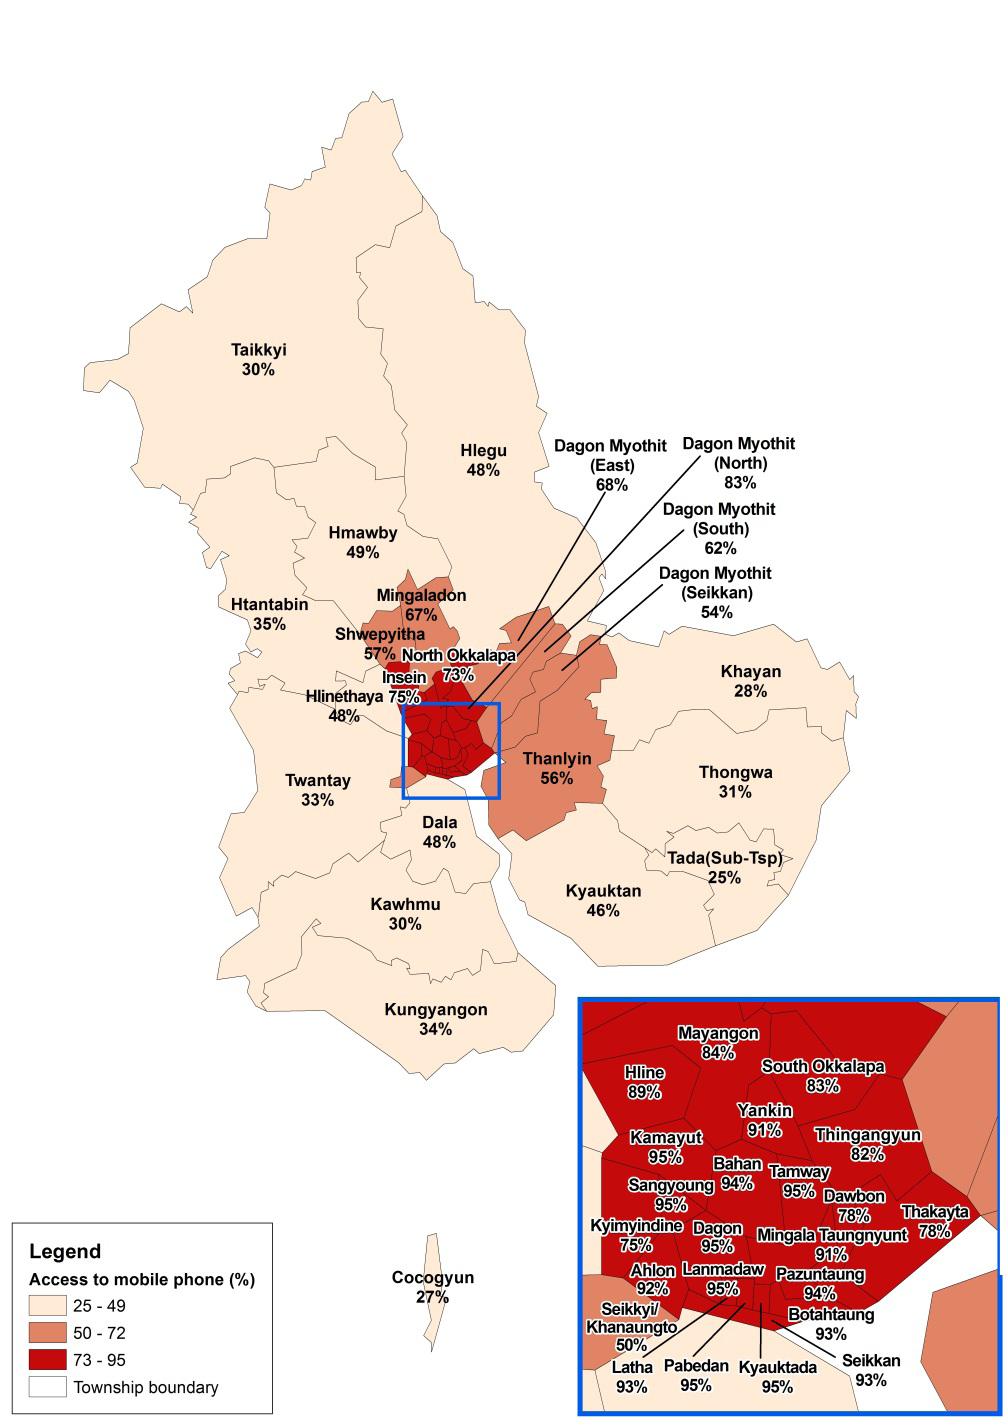 Figure 19: Proportion of households with access to mobile phone Union : 32.9% Yangon Region : 60.9% West District : 89.1% Lanmadaw Township : 95.